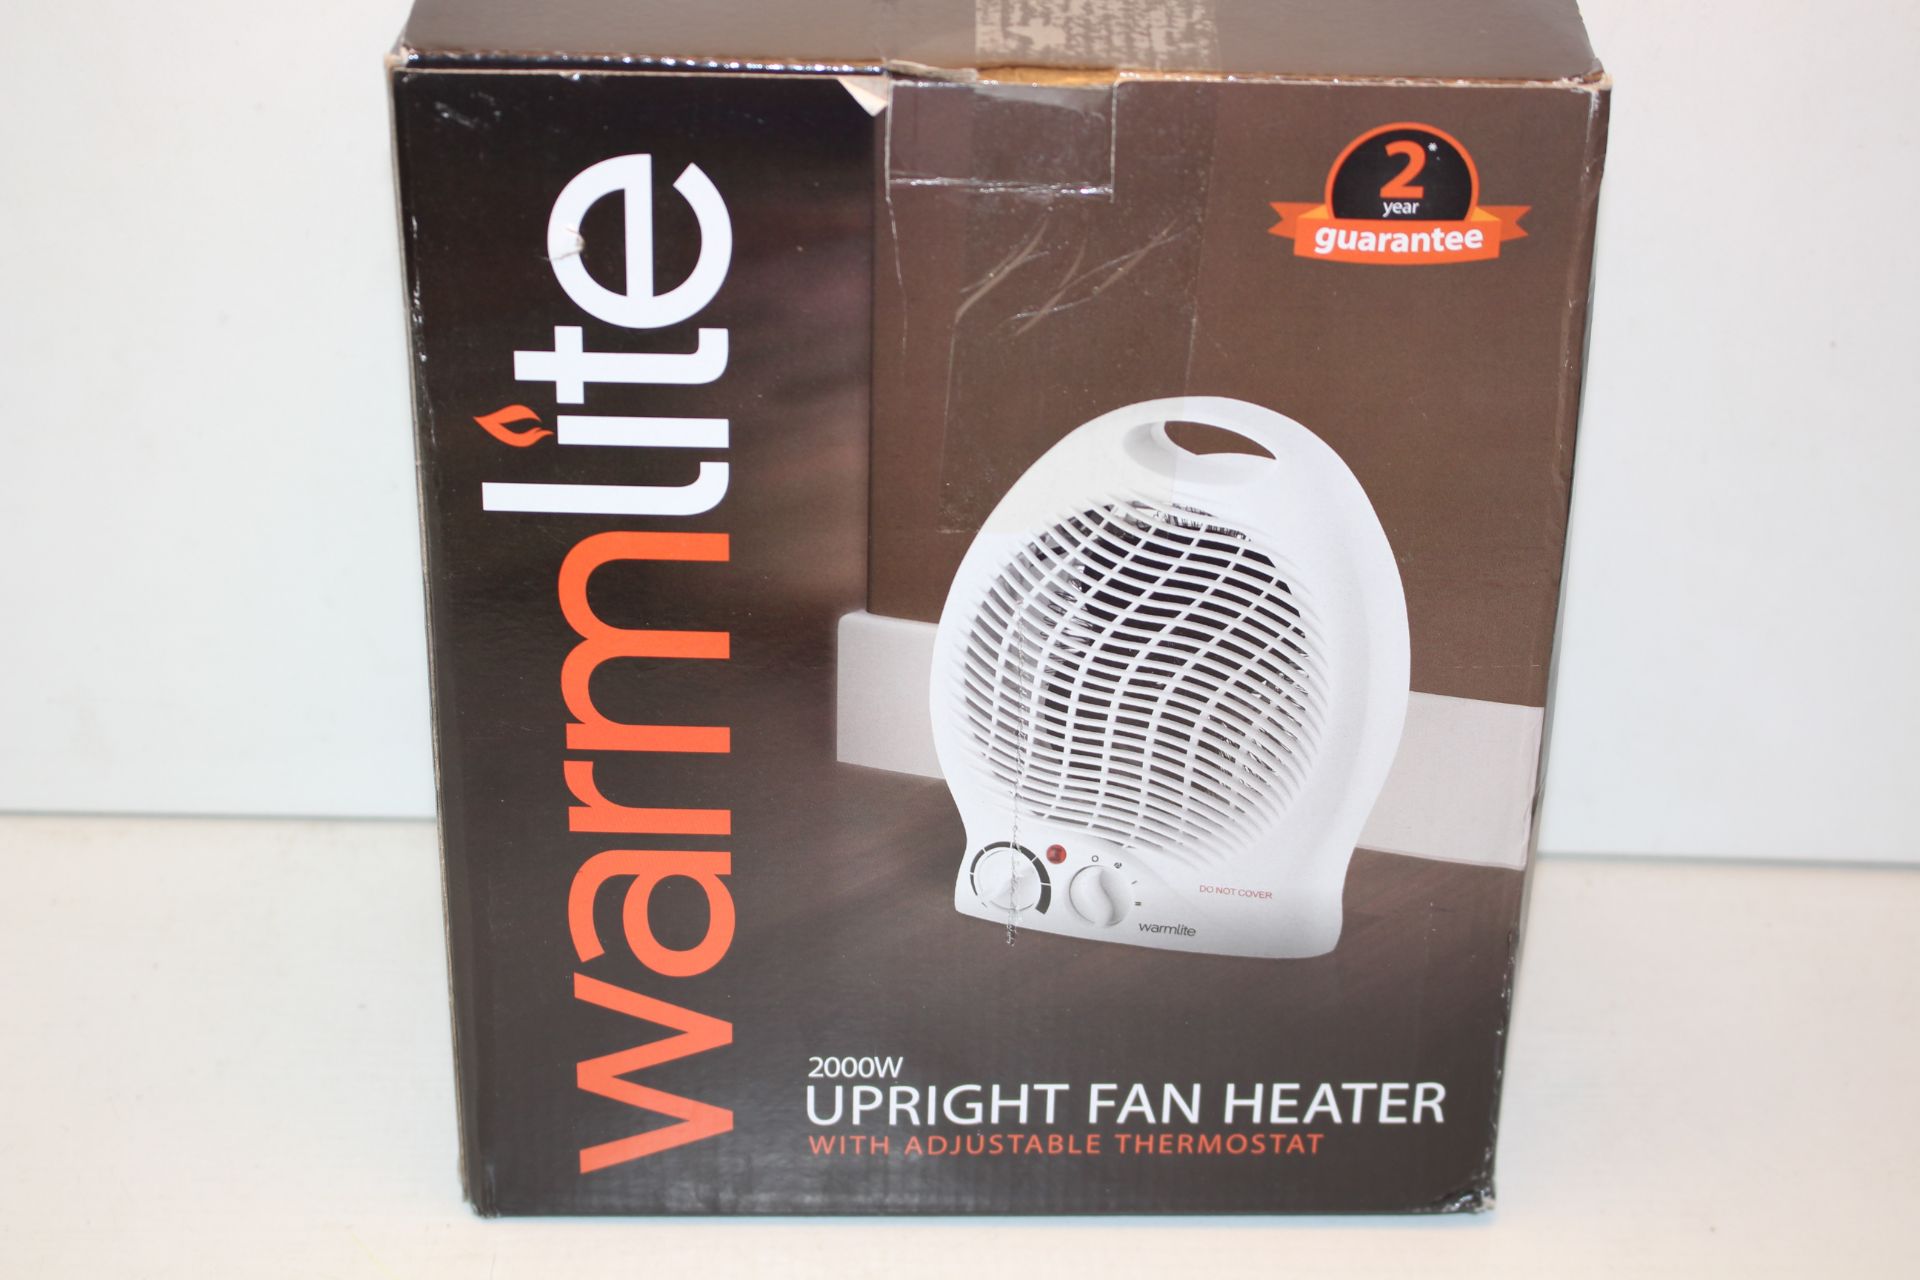 BOXED WARMLITE 2000W UPTRIGHT FAN HEATER WITH ADJUSTABLE THERMOSTAT RRP £17.99Condition